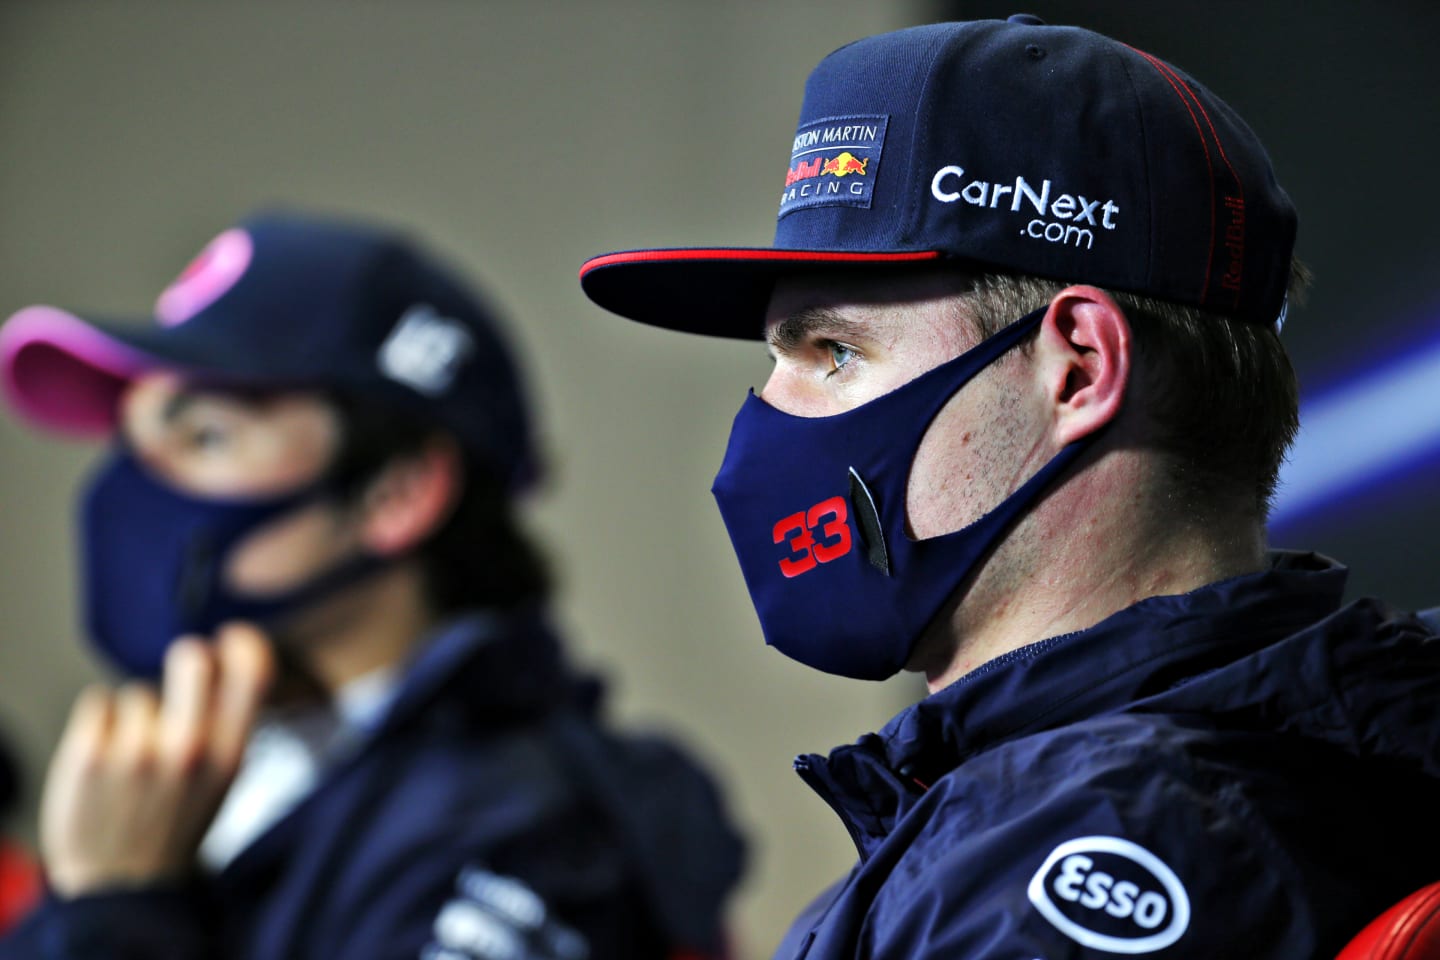 ISTANBUL, TURKEY - NOVEMBER 14: Second place qualifier Max Verstappen of Netherlands and Red Bull